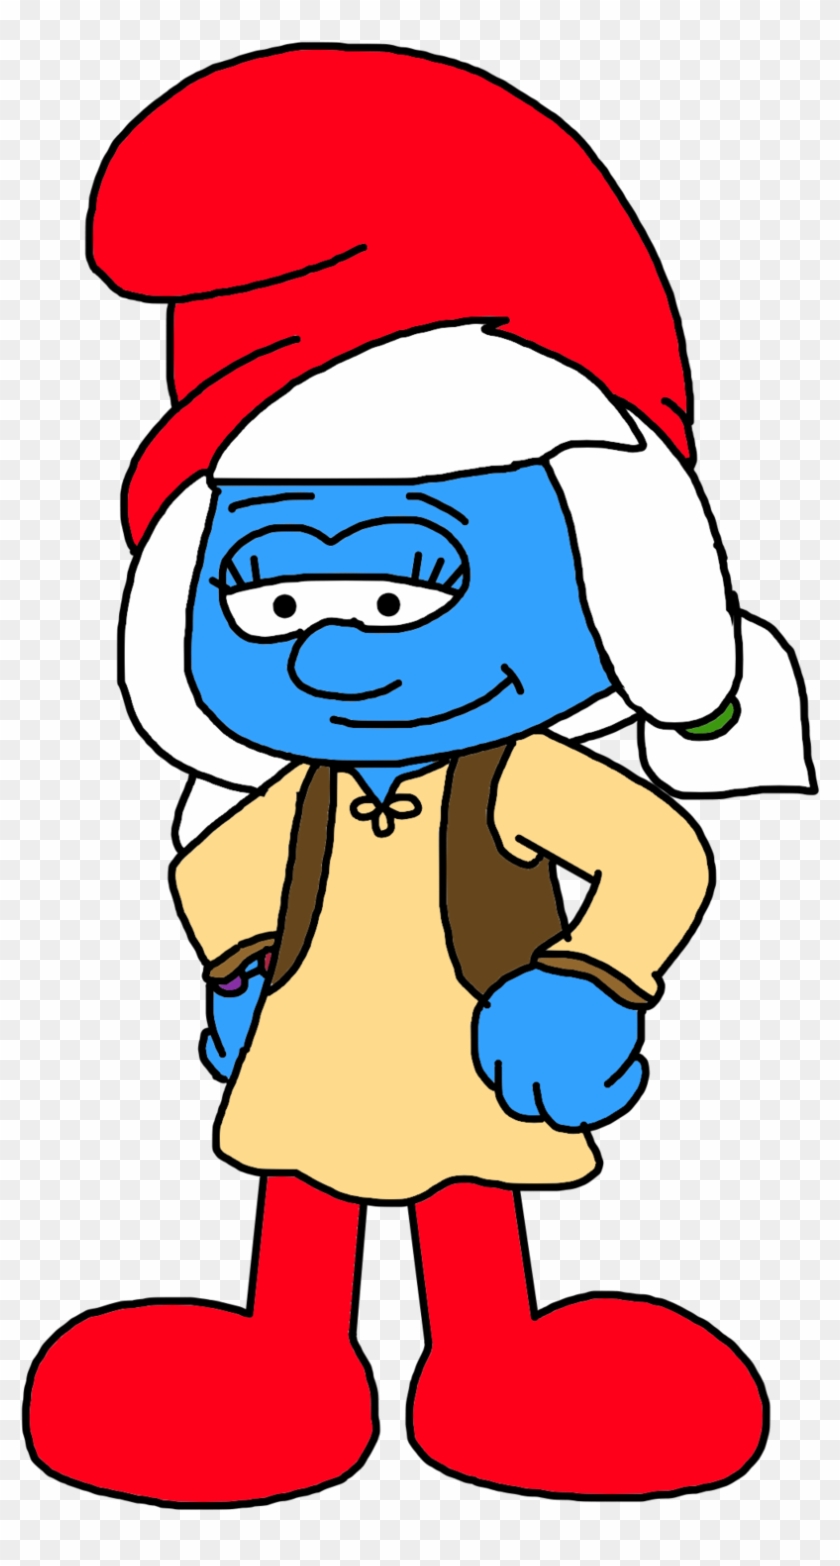 Smurfwillow By Marcospower1996 Smurfwillow By Marcospower1996 - Smurfs Willow Png #1166628